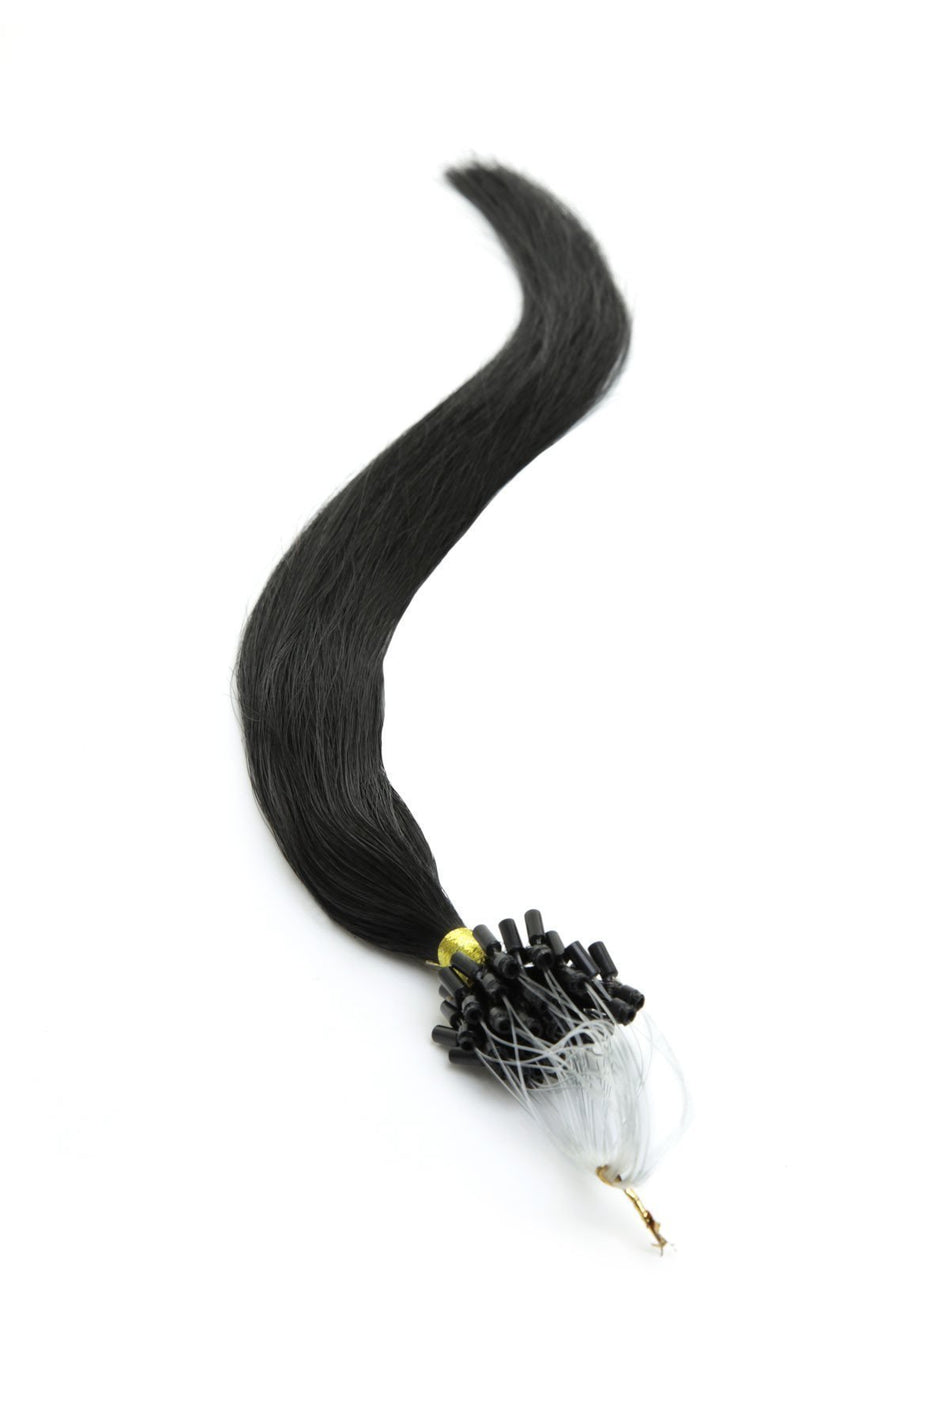 Micro Ring Hair Extensions | 22 inch Jet Black (1) - Beauty Hair Products LtdHair Extensions